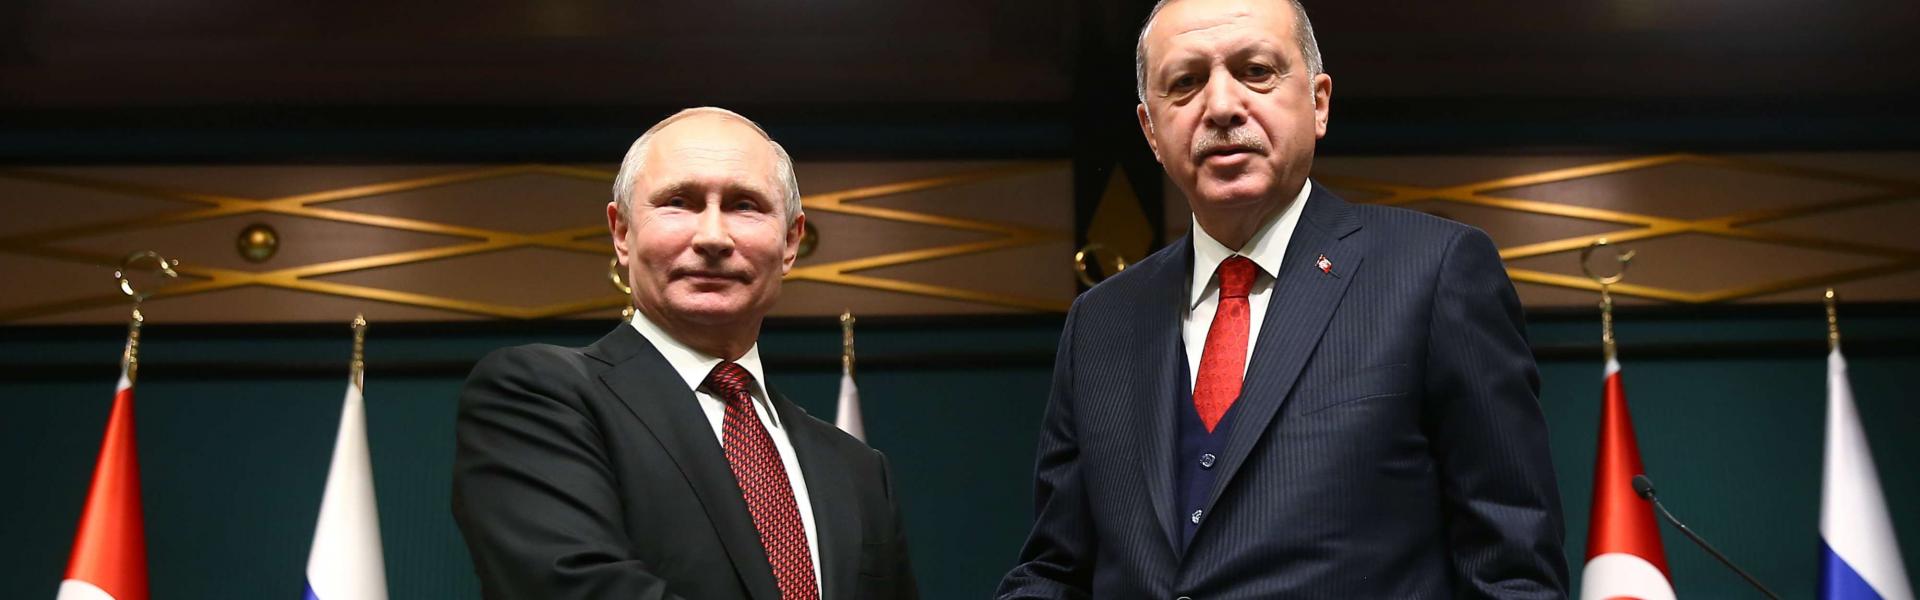 S-400 crisis with U.S. could make Turkey a Russian vassal - analyst 2